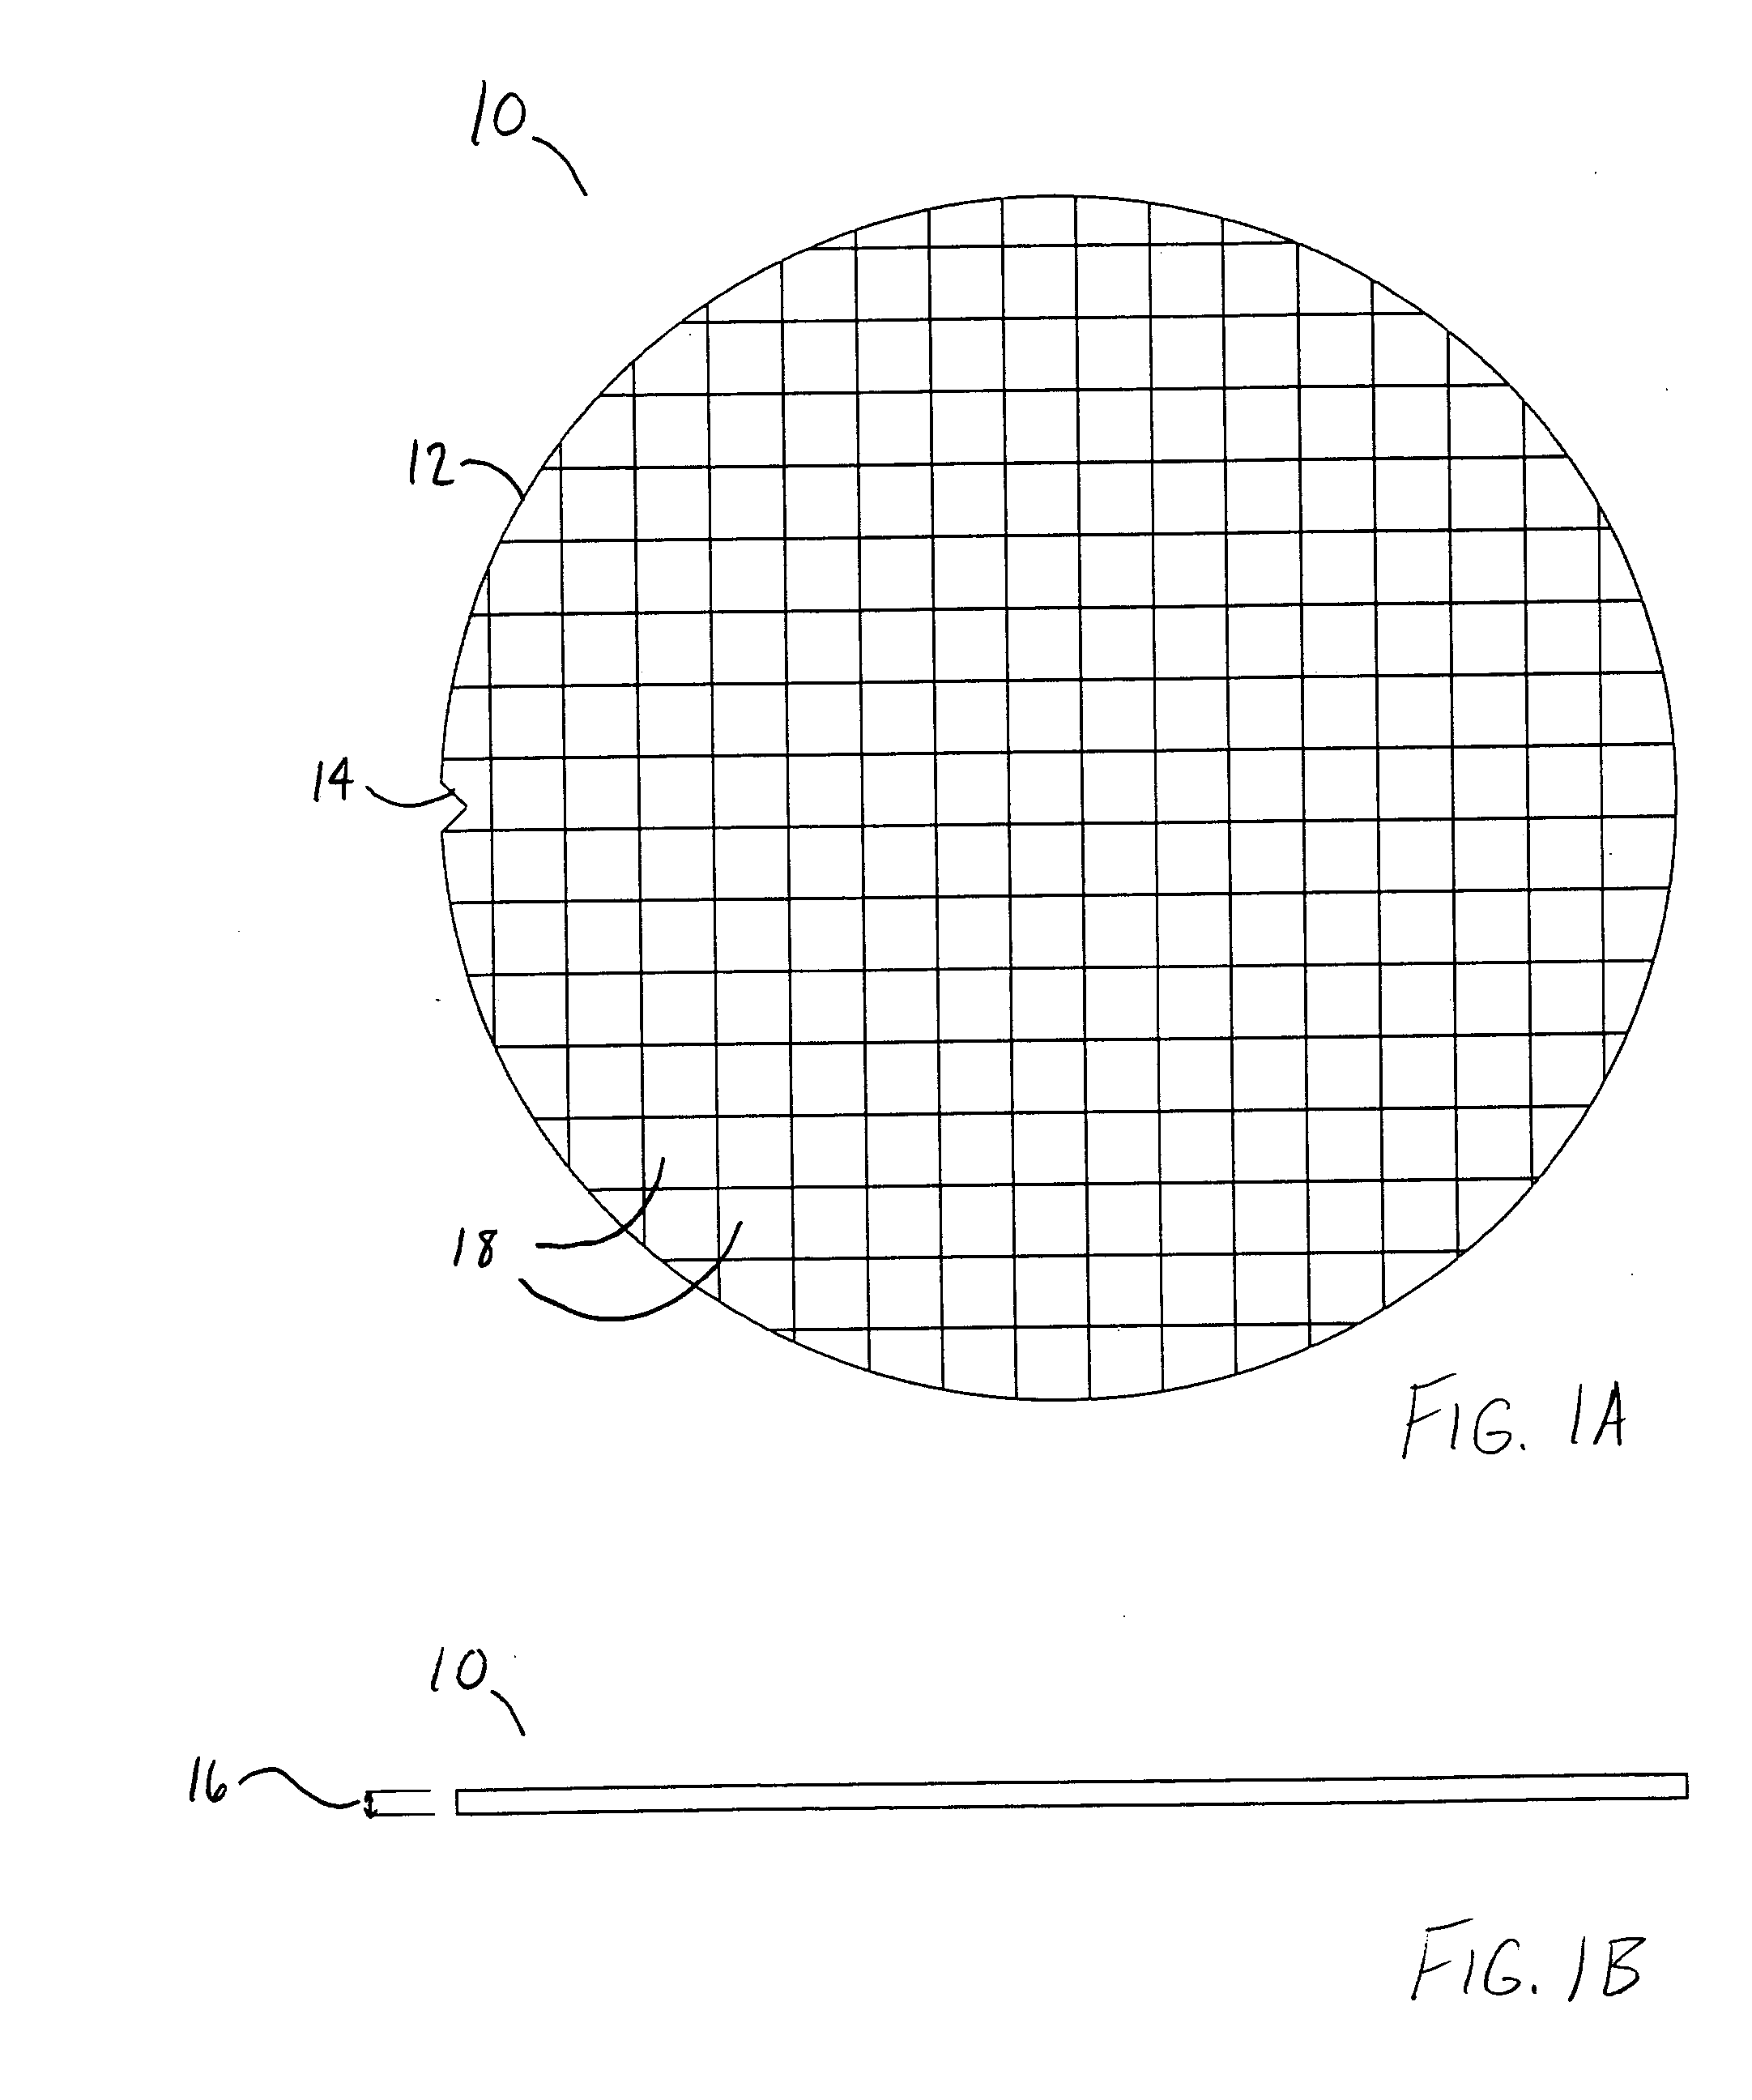 Electronic assembly with carbon nanotube contact formations or interconnections